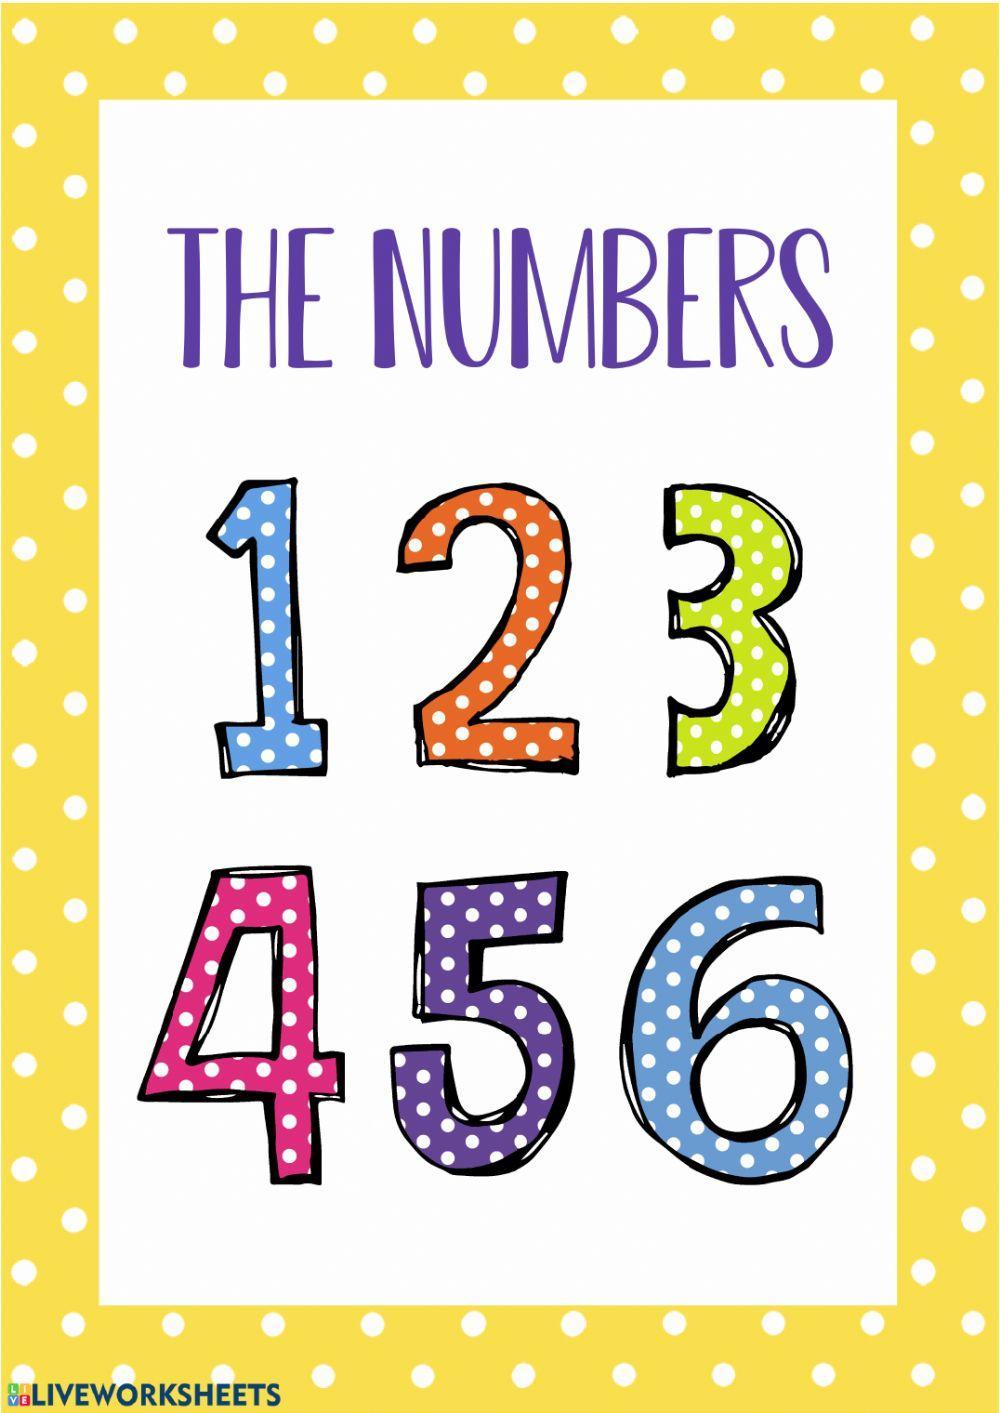 Divisor 5. The numbers